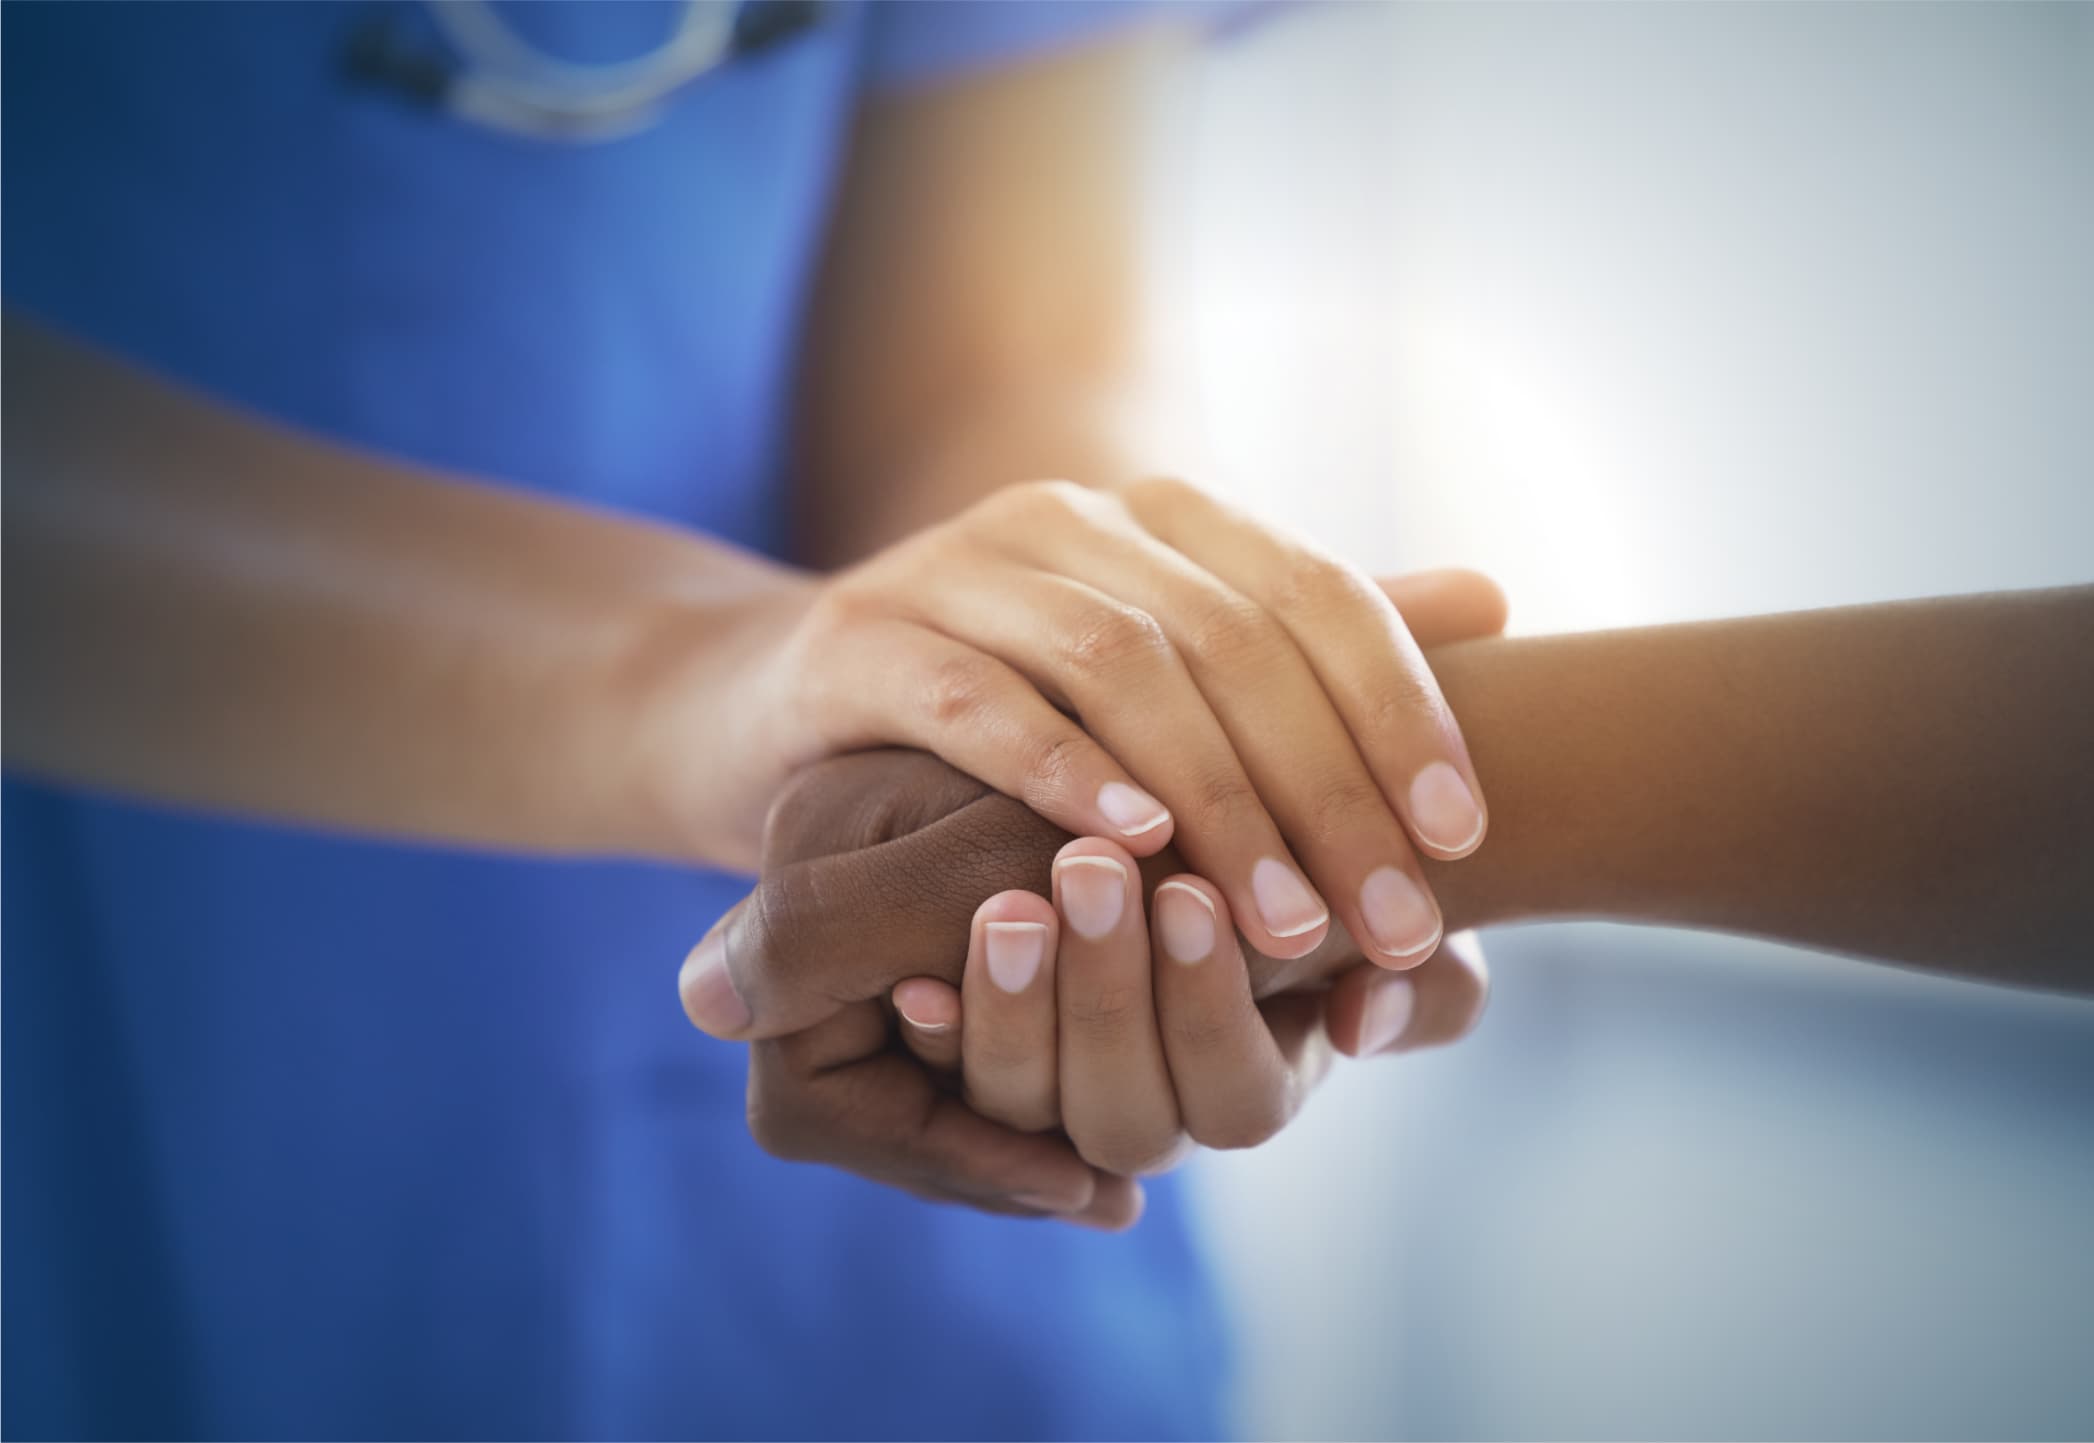 A healthcare provider's hands clasped empathetically around the outstretched hand of her patient.